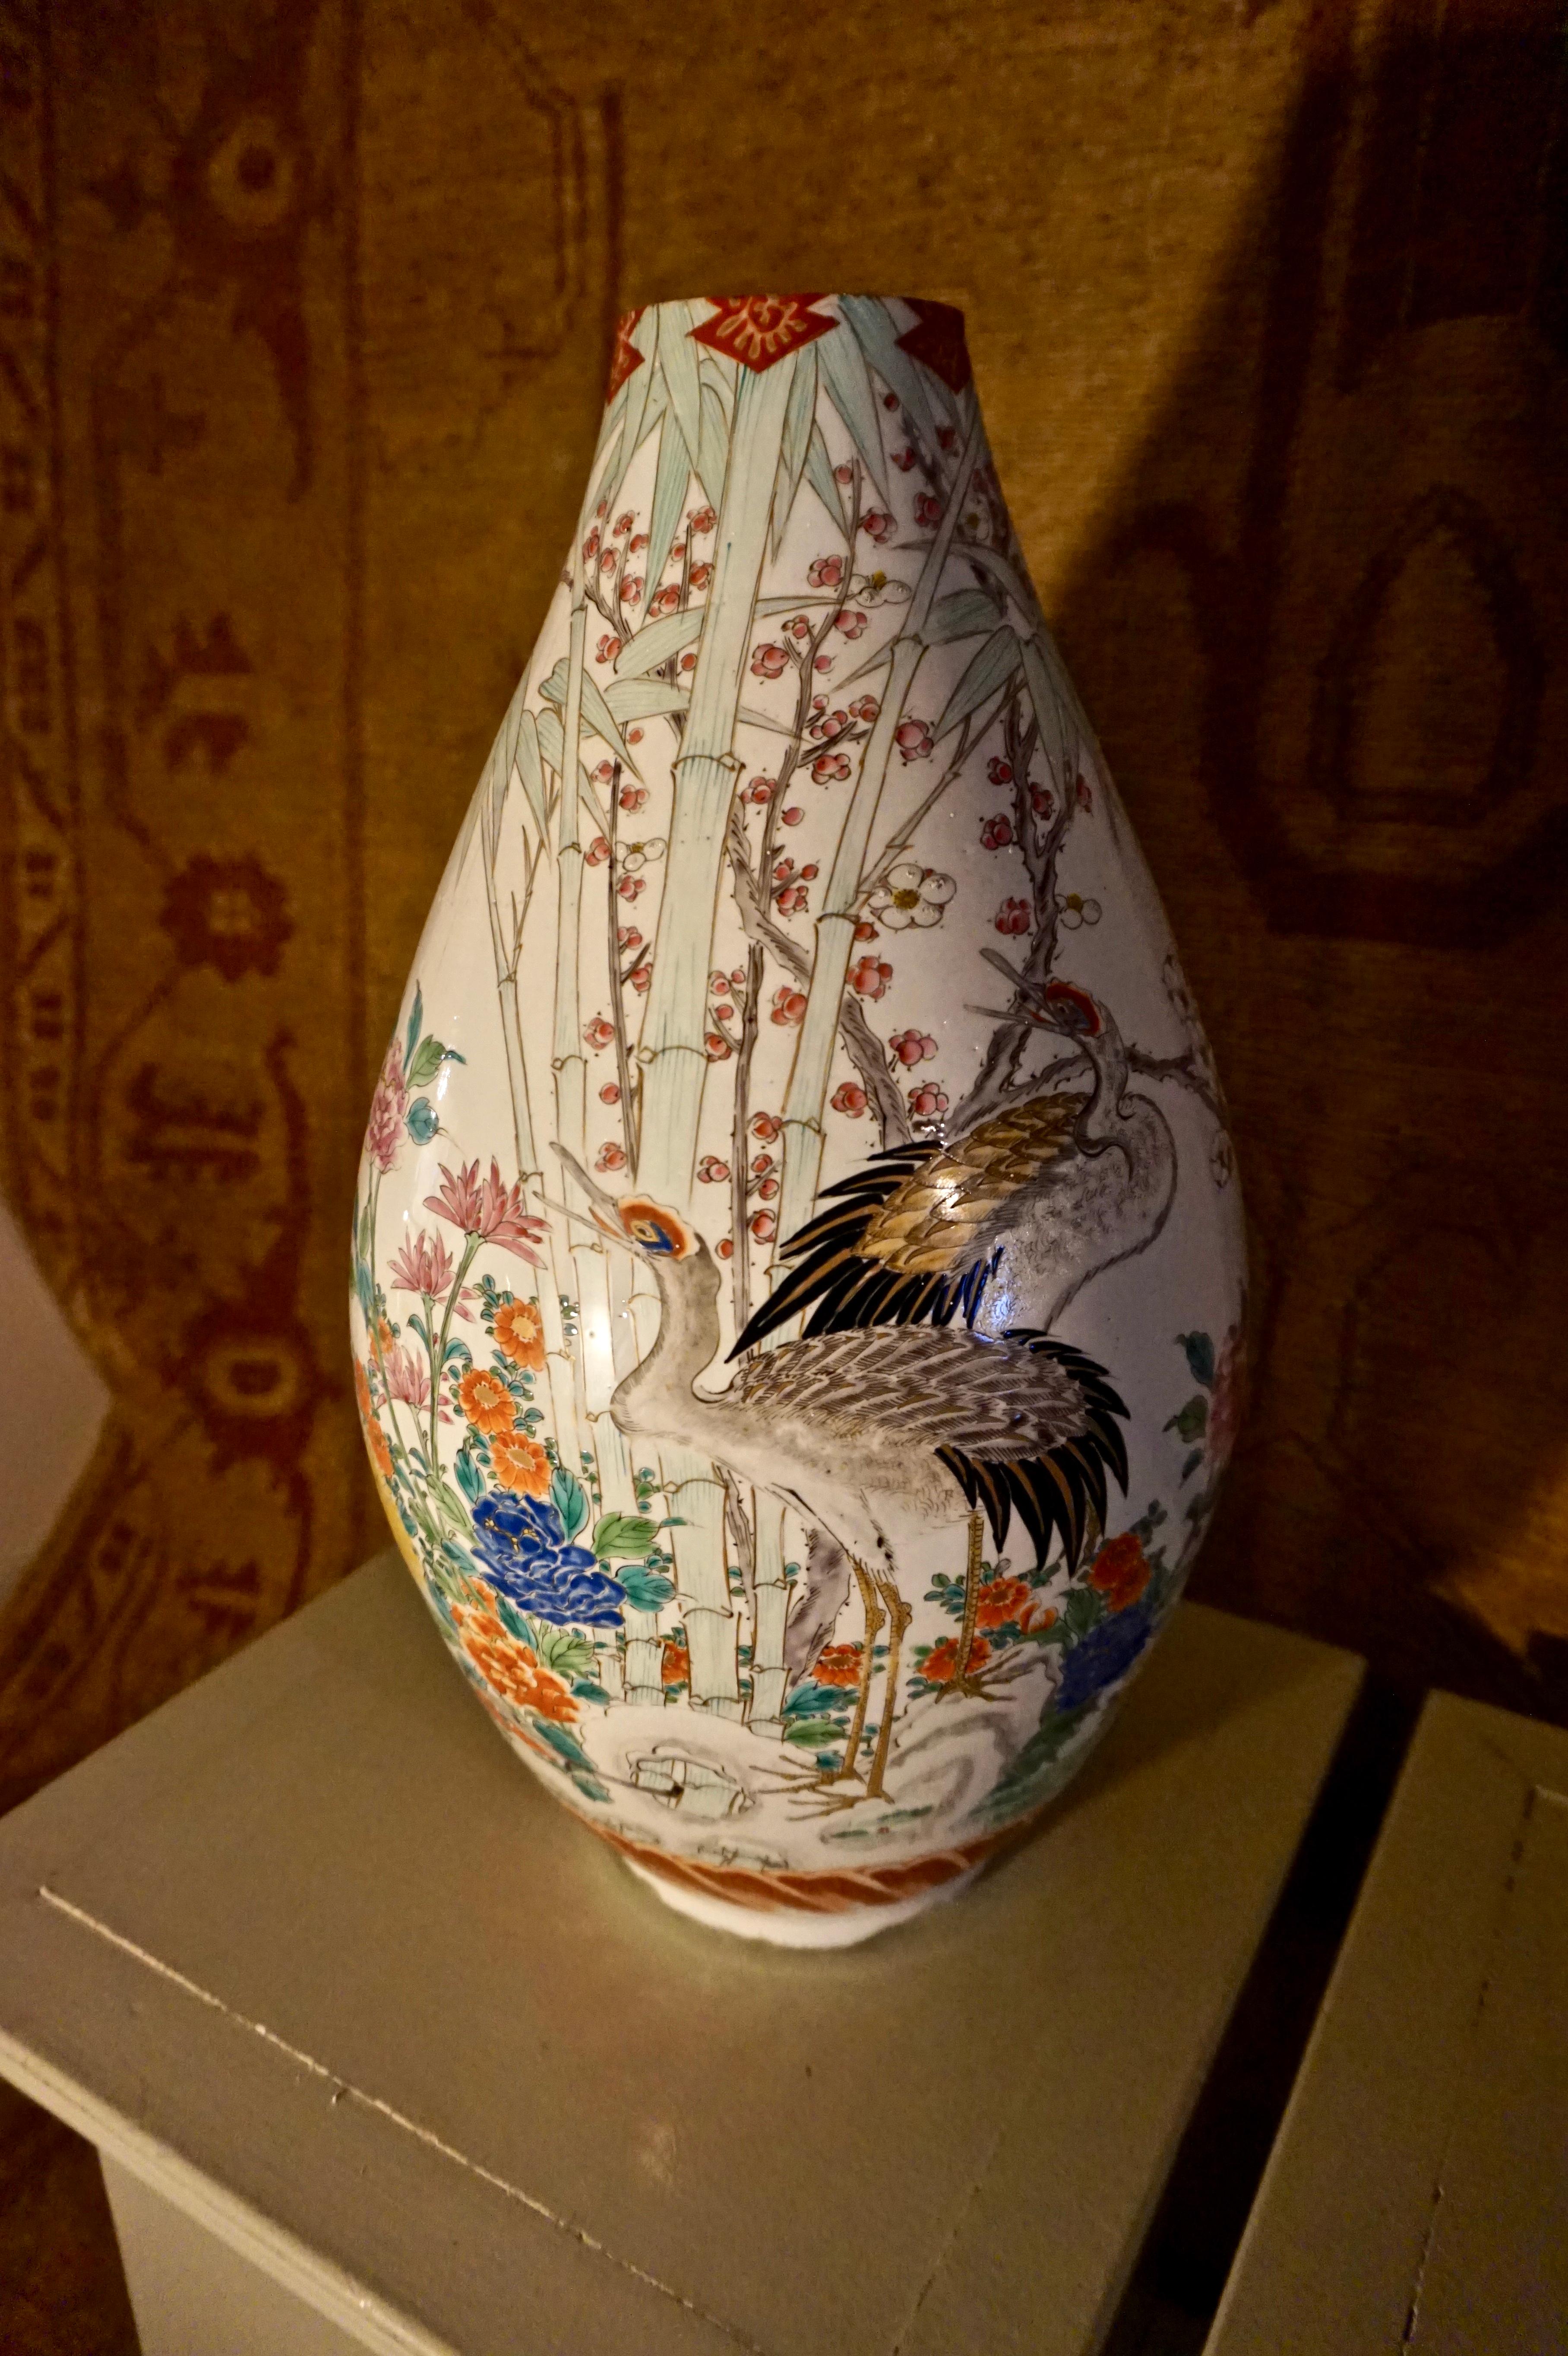 Large Japanese Conical vase in the style of Famille Verte with exquisitely painted cranes and flying song birds amidst spring foliage. Some hairline cracks are visible but these do not detract from the Fine Art work on display in the scenes